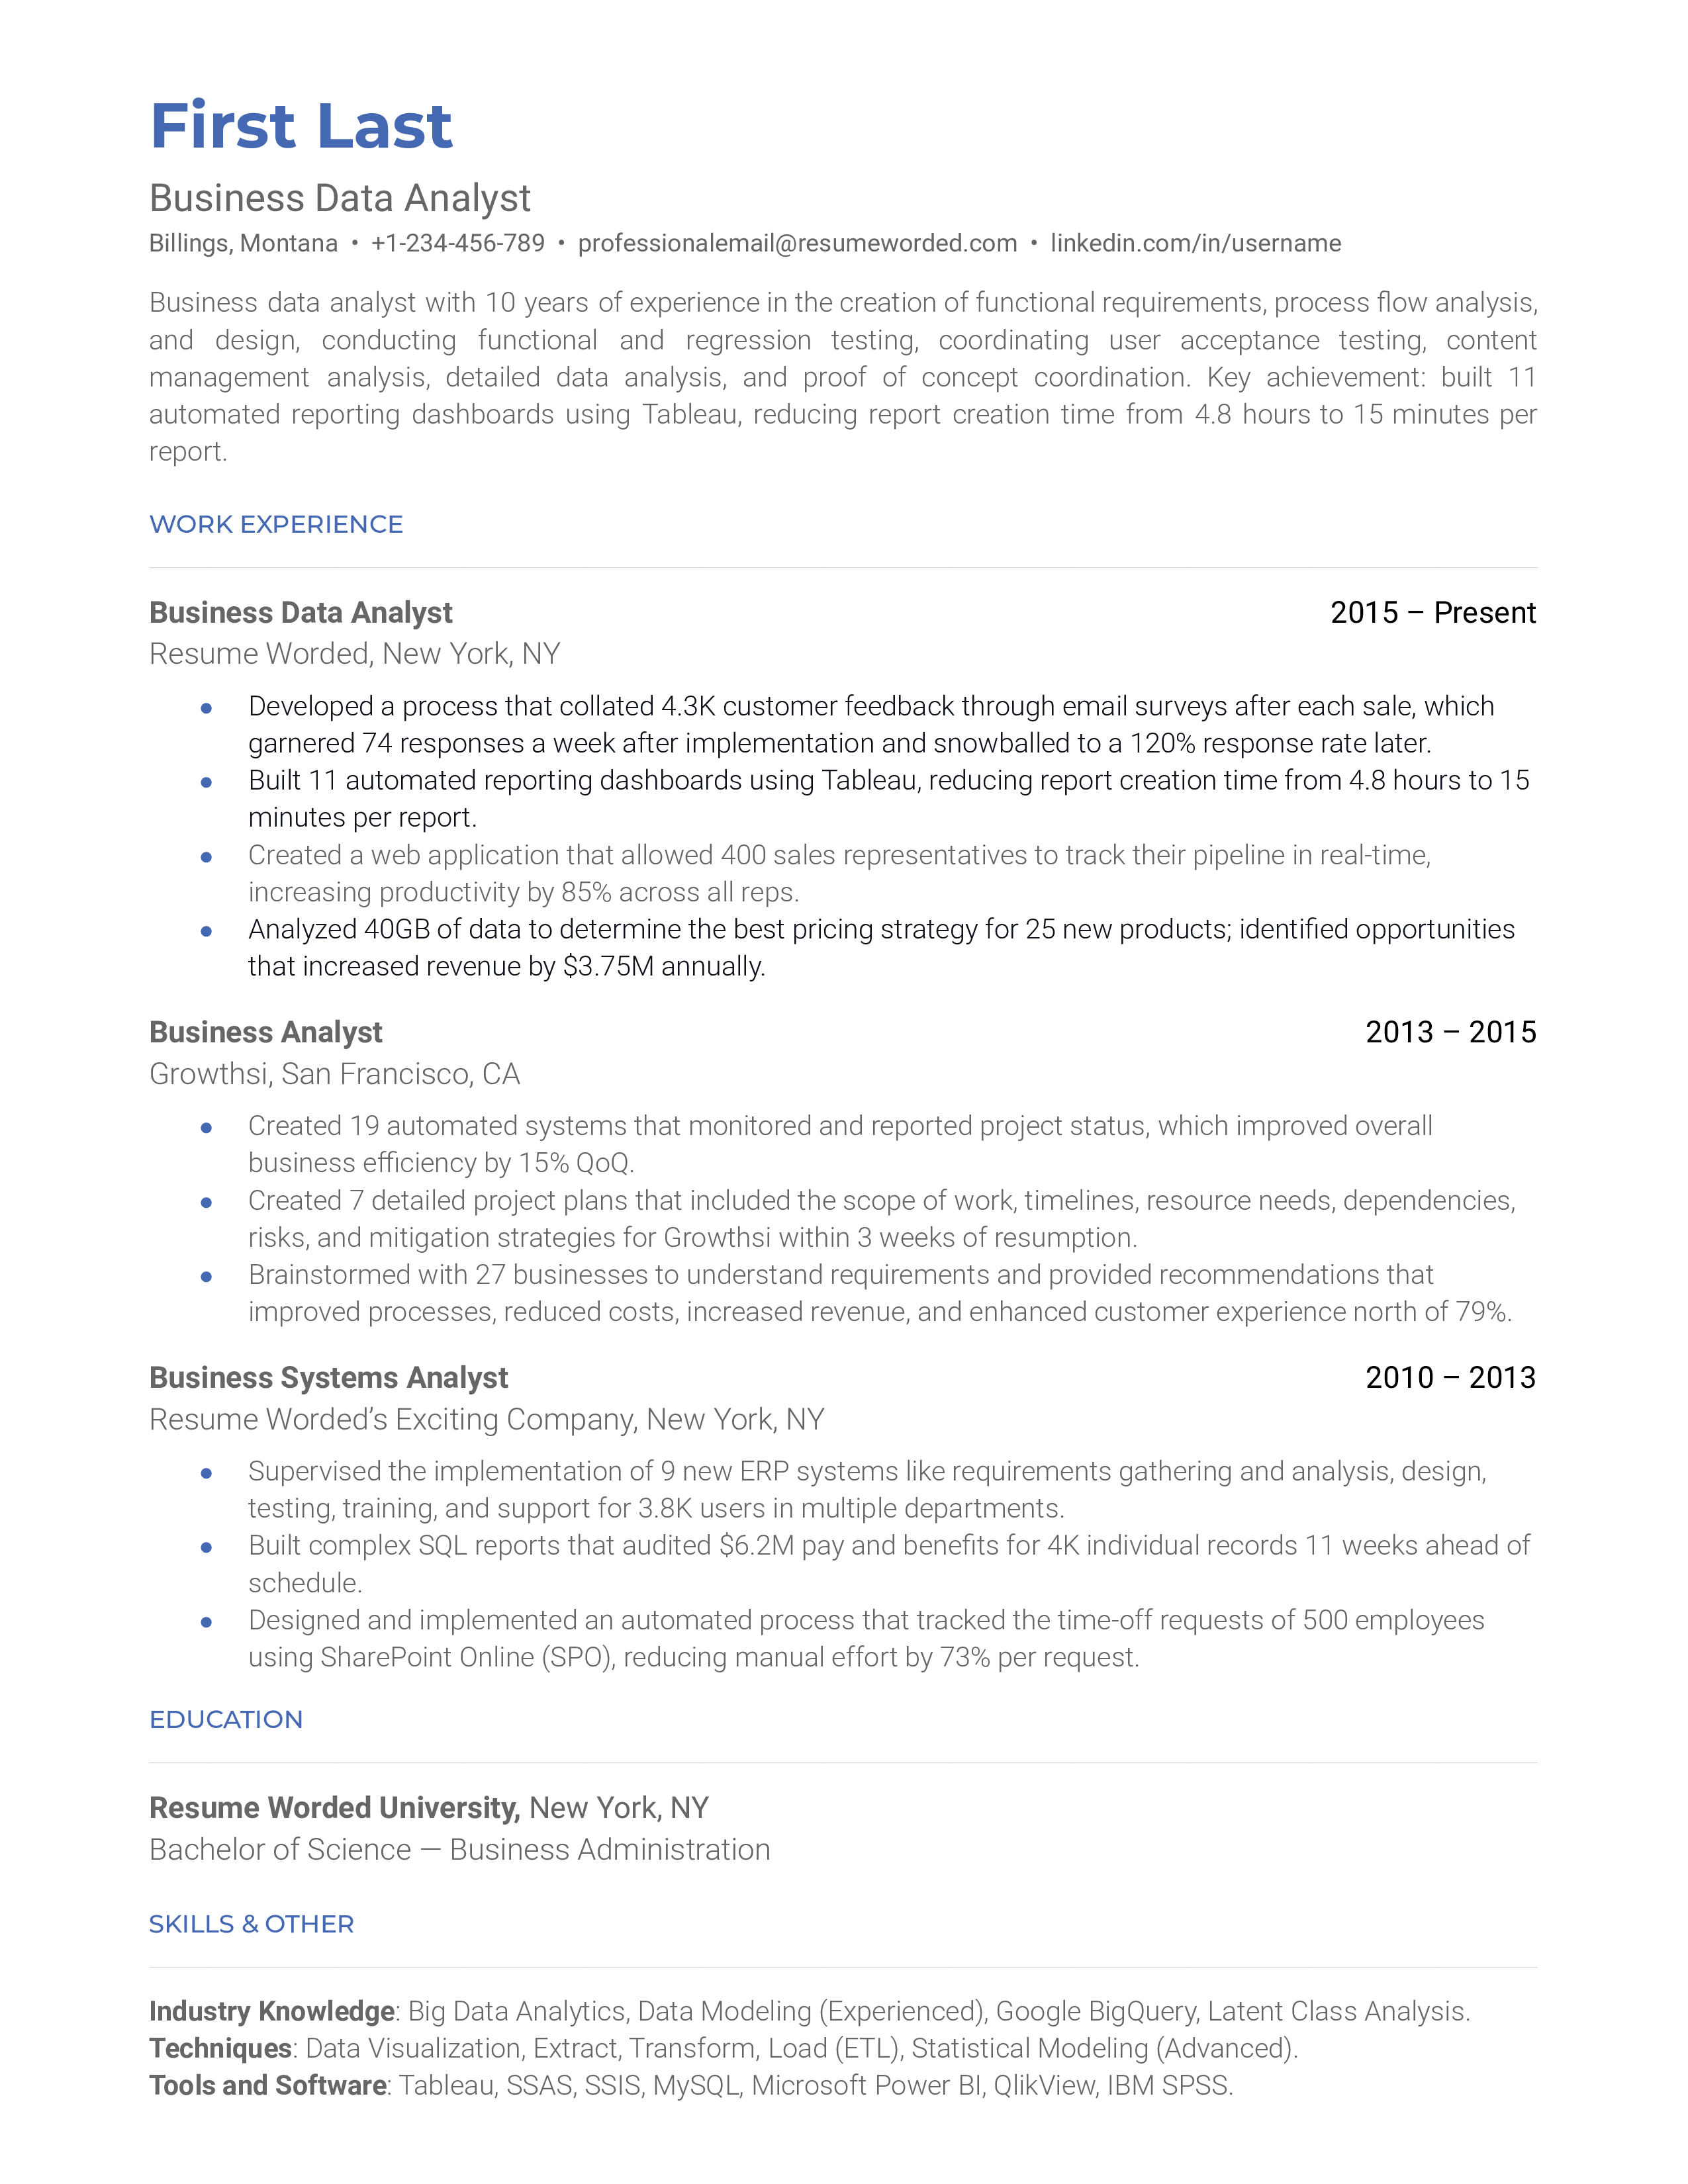 A Business Data Analyst CV highlighting analytical skills and project management experience.